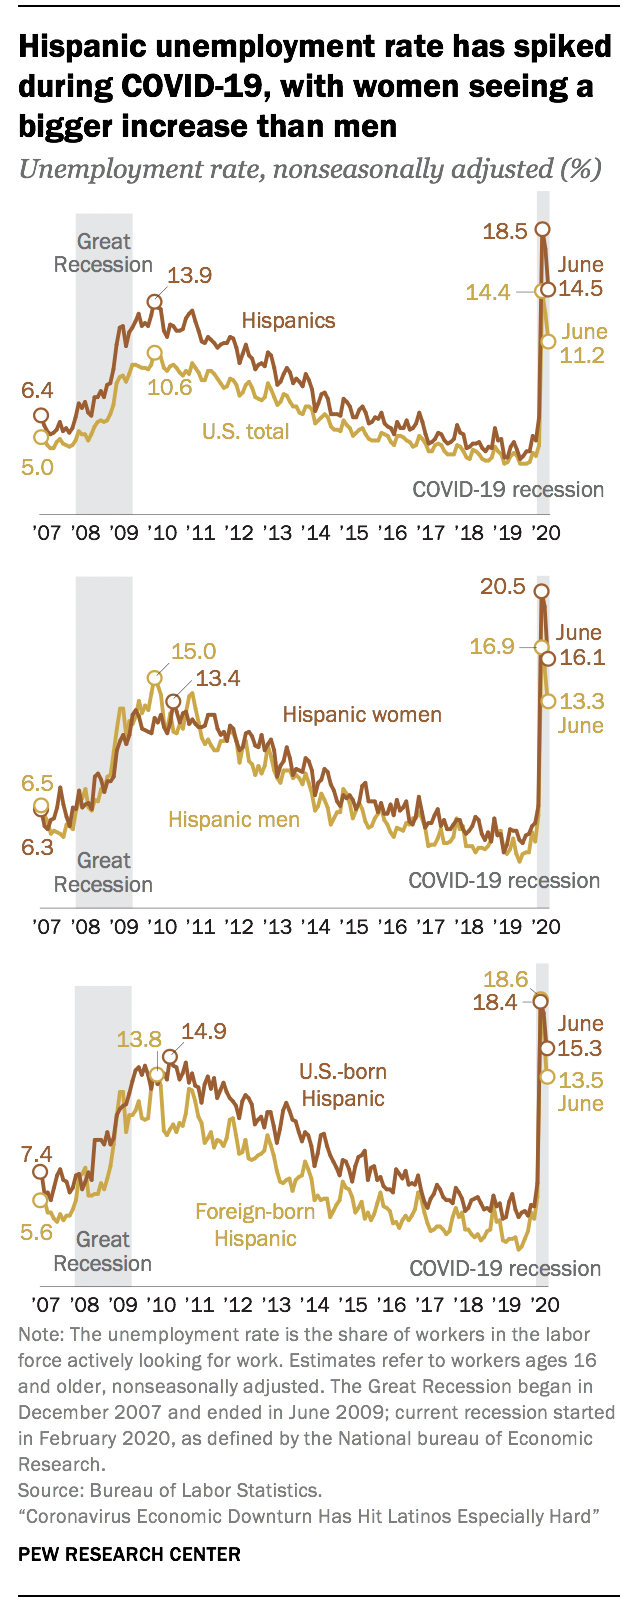 Hispanic unemployment rate has spiked during COVID-19, with women seeing a bigger increase than men